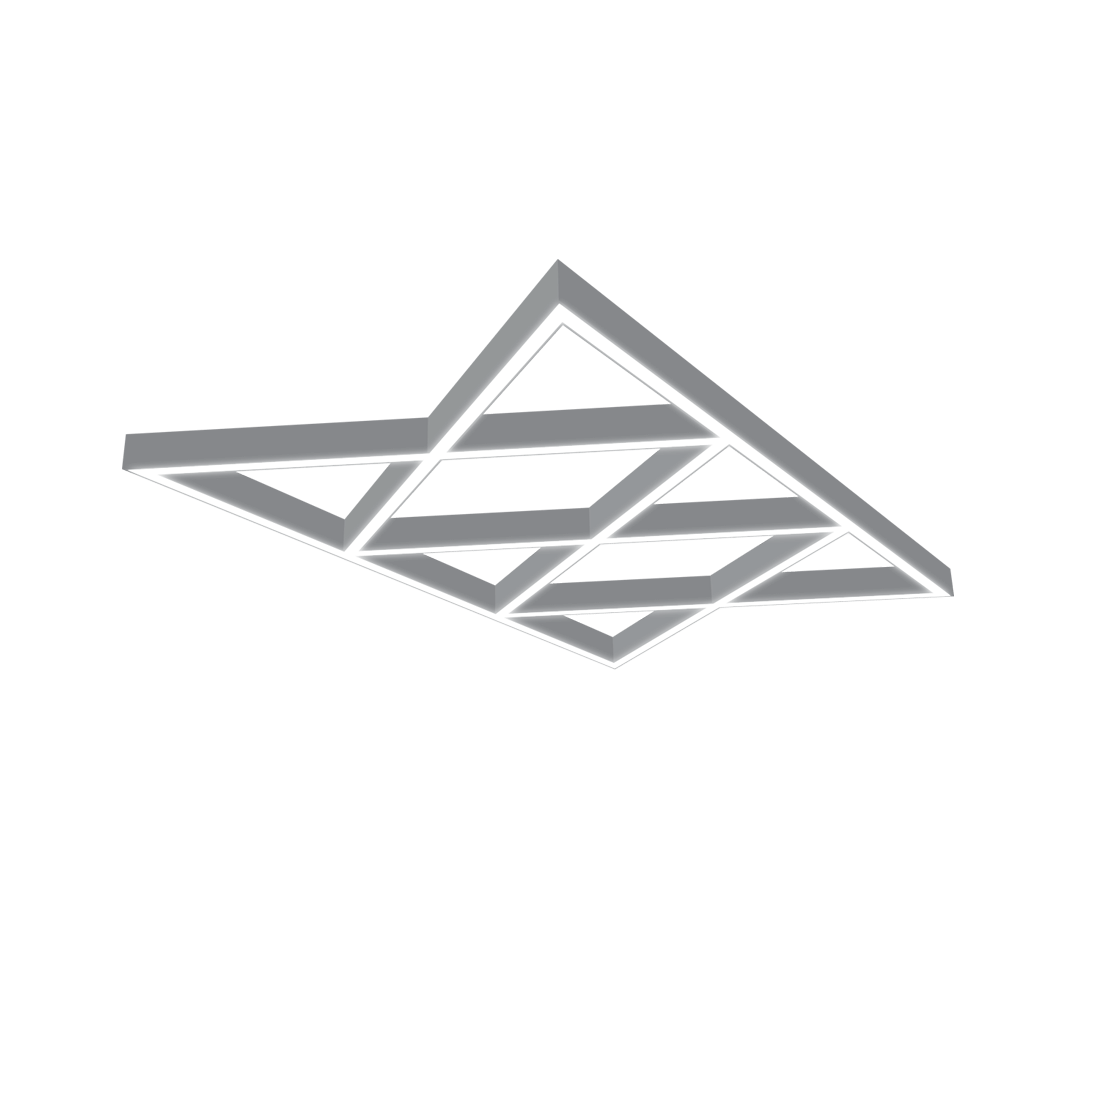 light fixture with 6 triangles combined